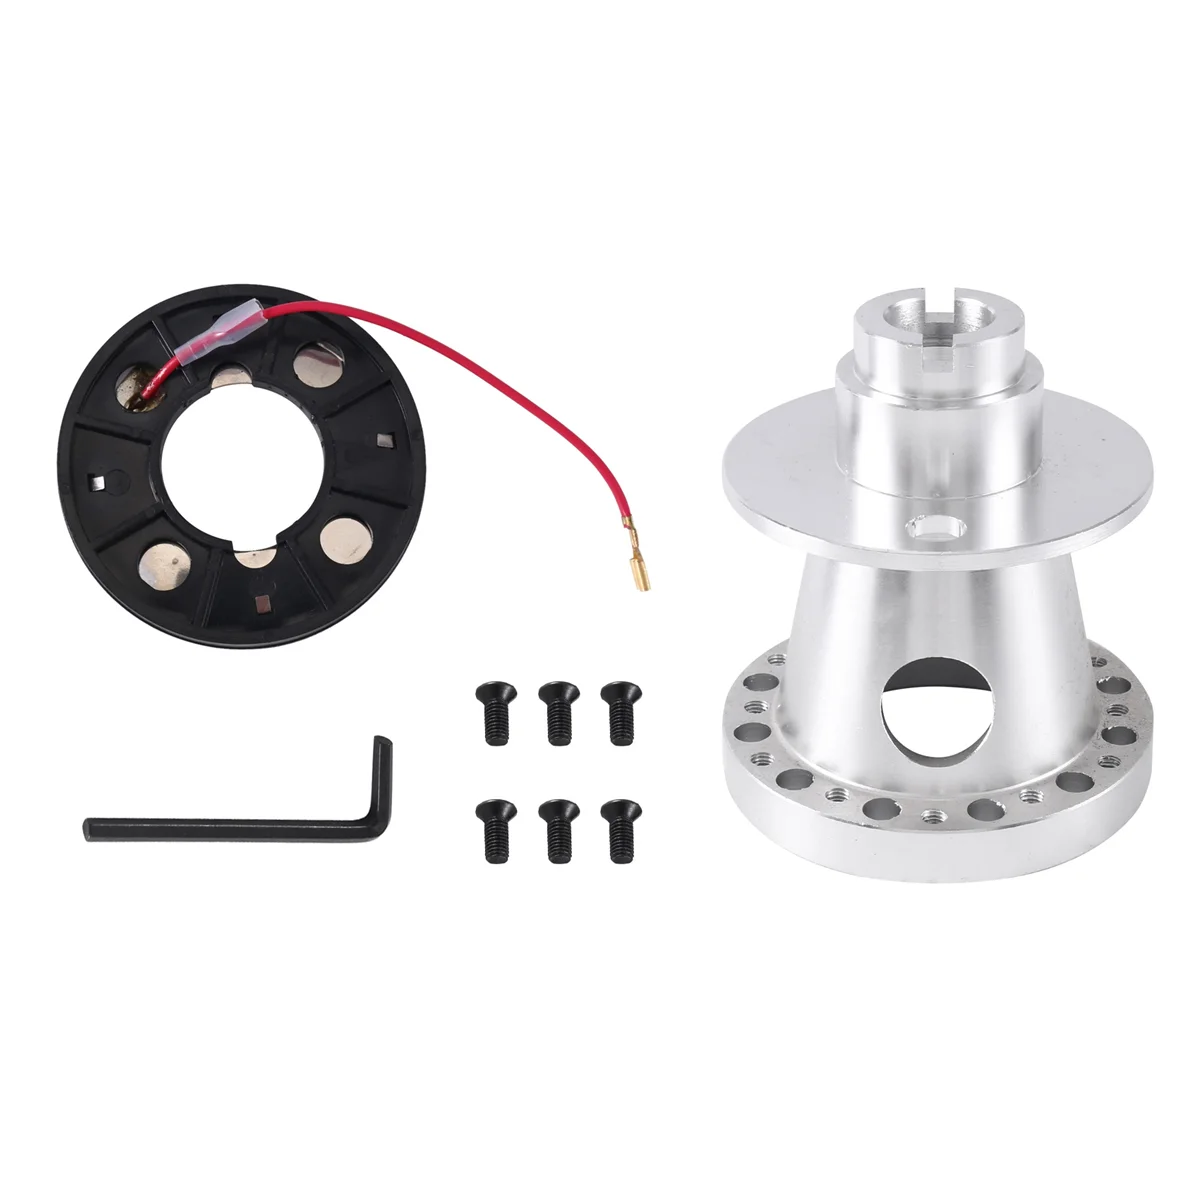 

OH-124 Automotive Quick Release Kit Wheel Adapter Steering Wheel Connector Disc Base Adapter for Honda